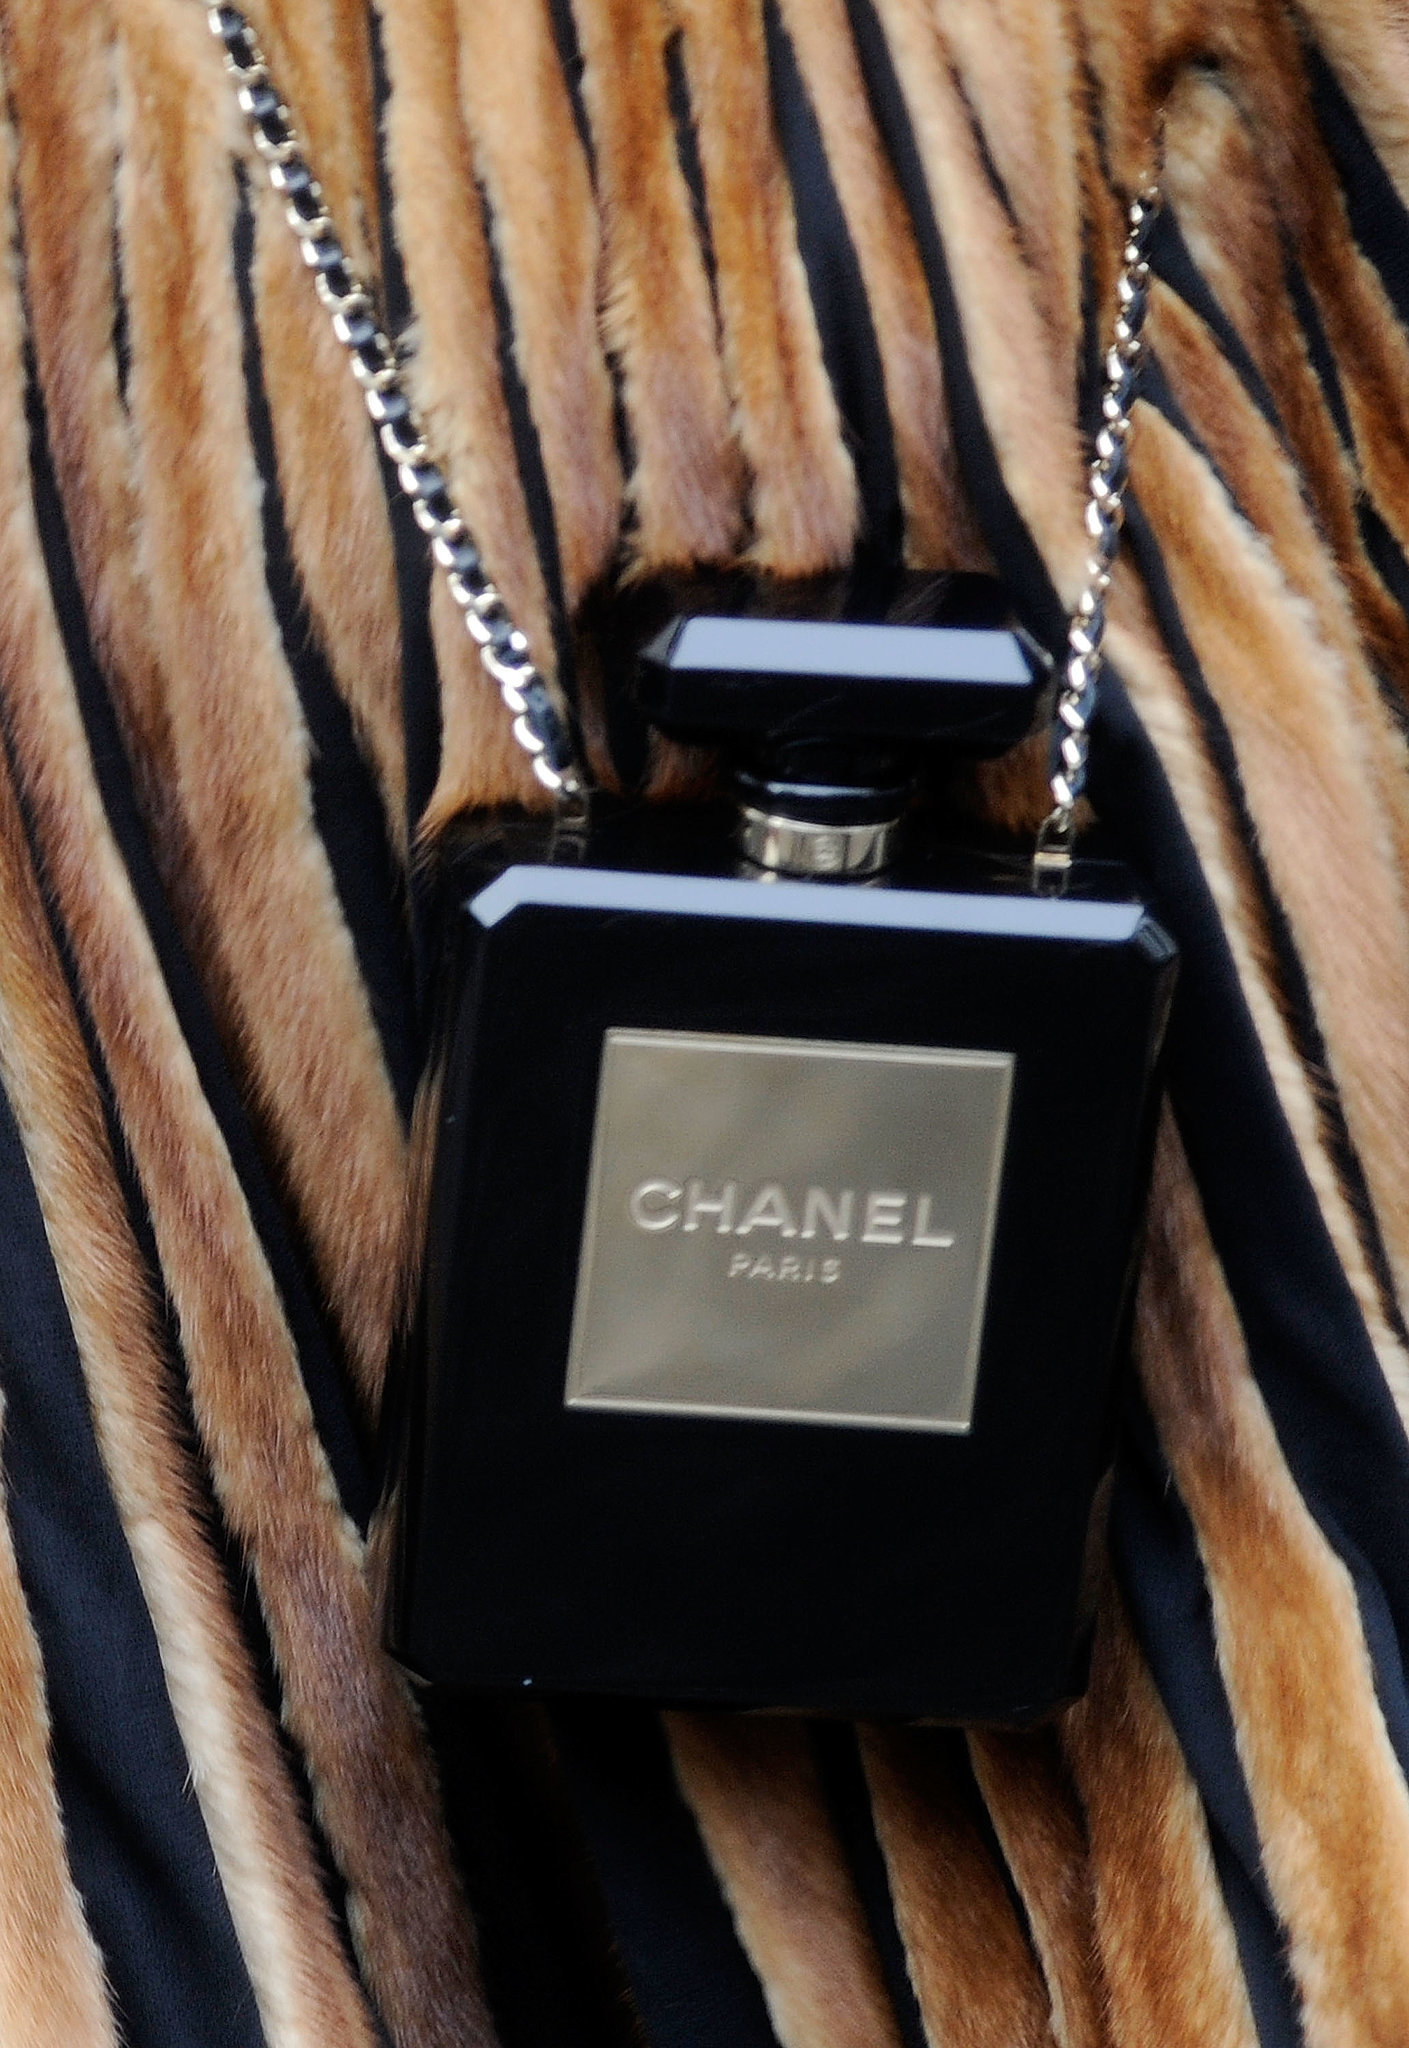 I mean, what's chicer than toting Chanel No. 5?
